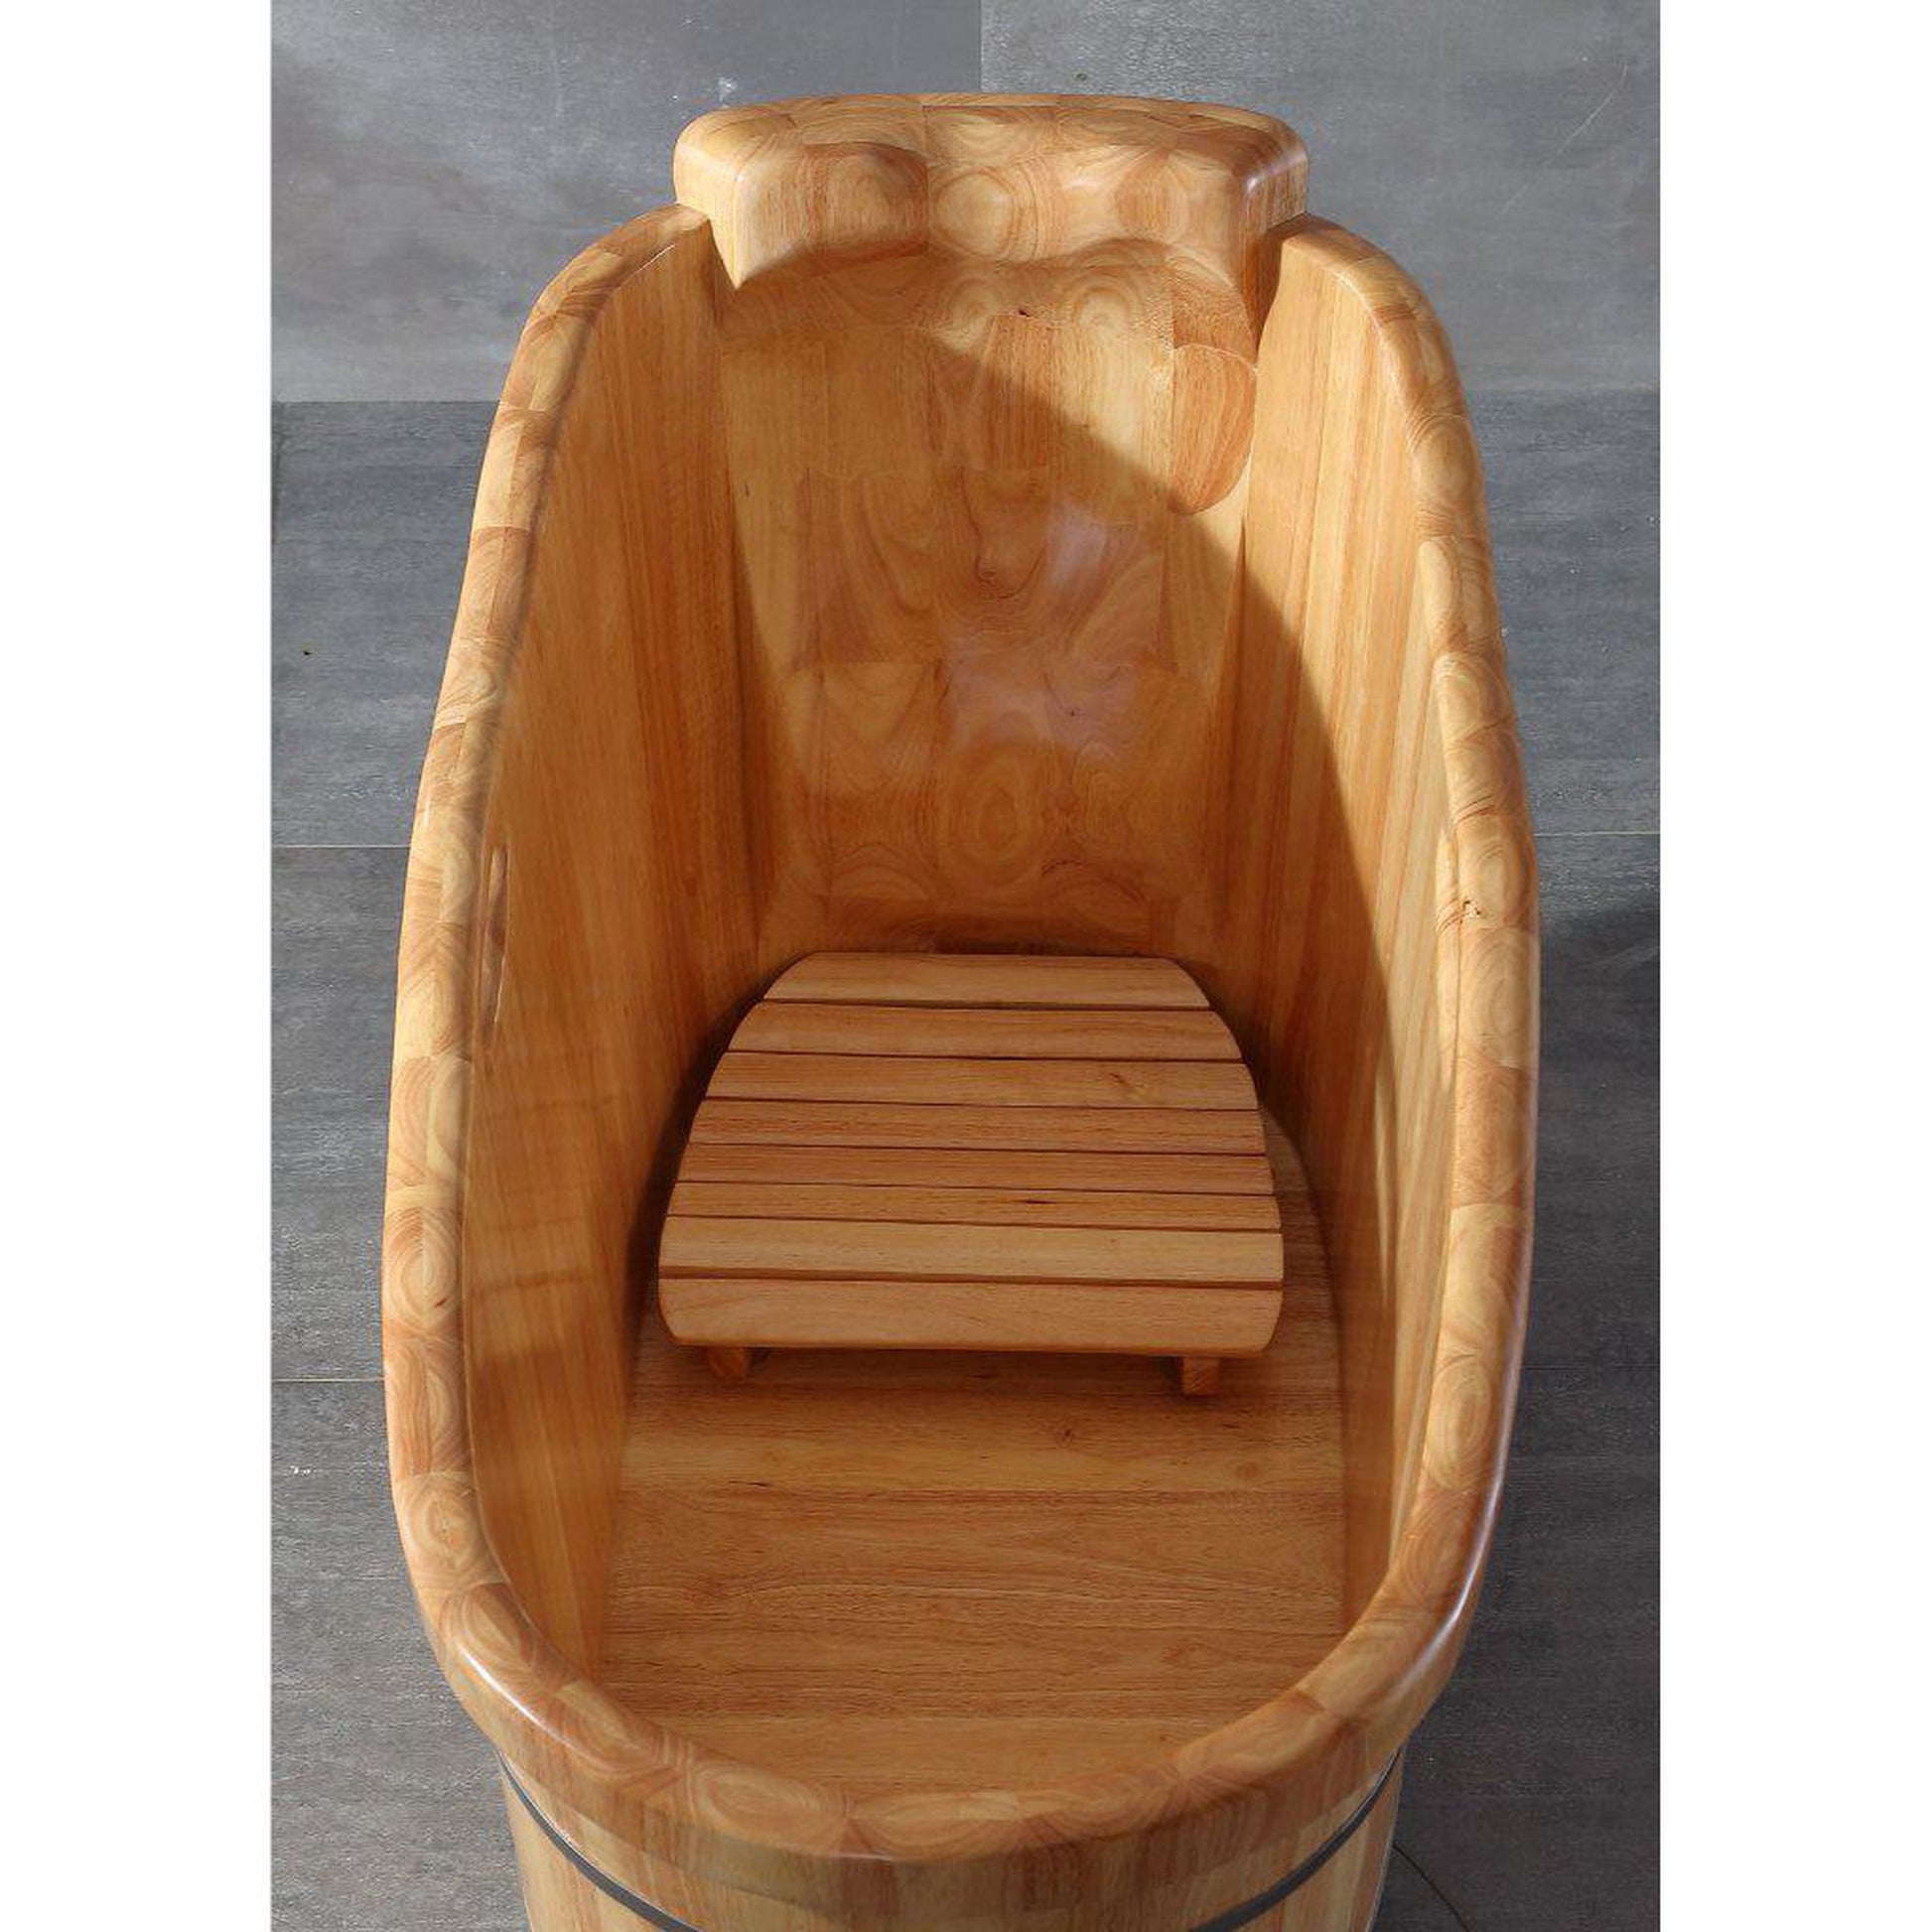 ALFI Brand AB1187 57" One Person Freestanding Soaking Rubber Wooden Bathtub With Headrest